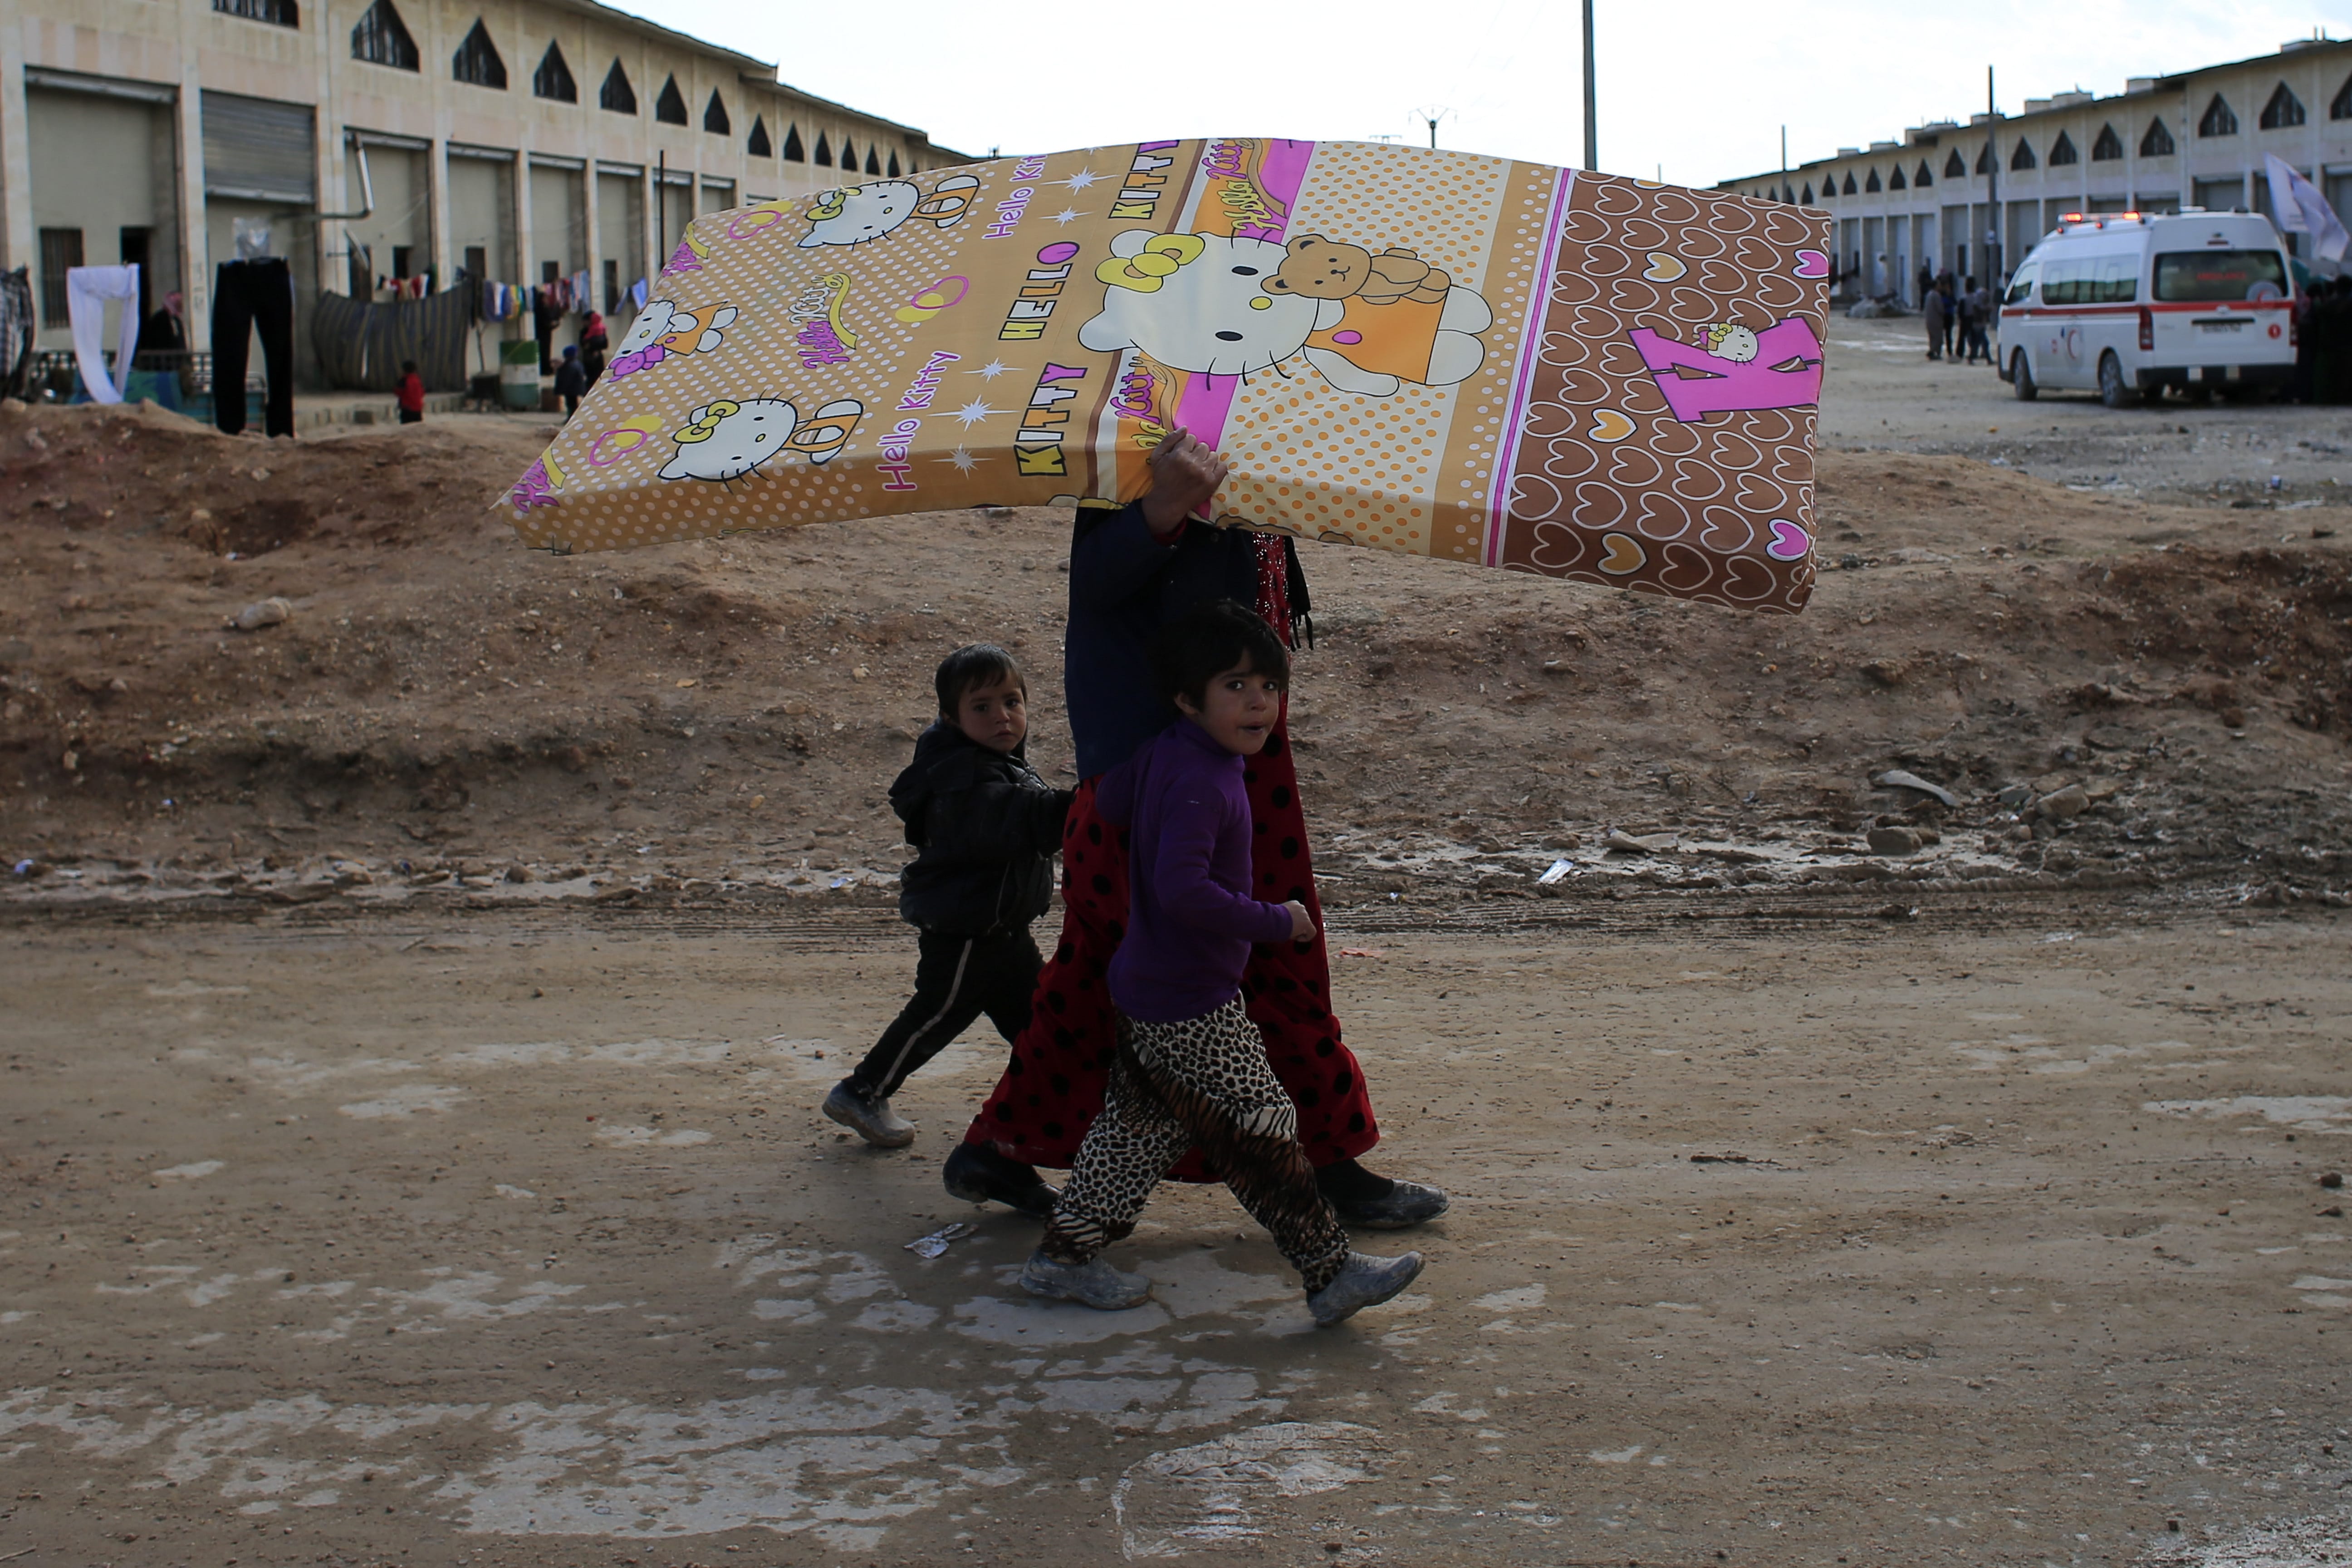 A Syrian woman displaced with her family from eastern Aleppo walks with her children as she carries a mattress in the village of Jibreen south of Aleppo, Syria, Saturday, Dec. 3, 2016. Aid agencies say that more than 30,000 people have fled rebel-held eastern neighborhoods of Aleppo that have been under tight siege since July.